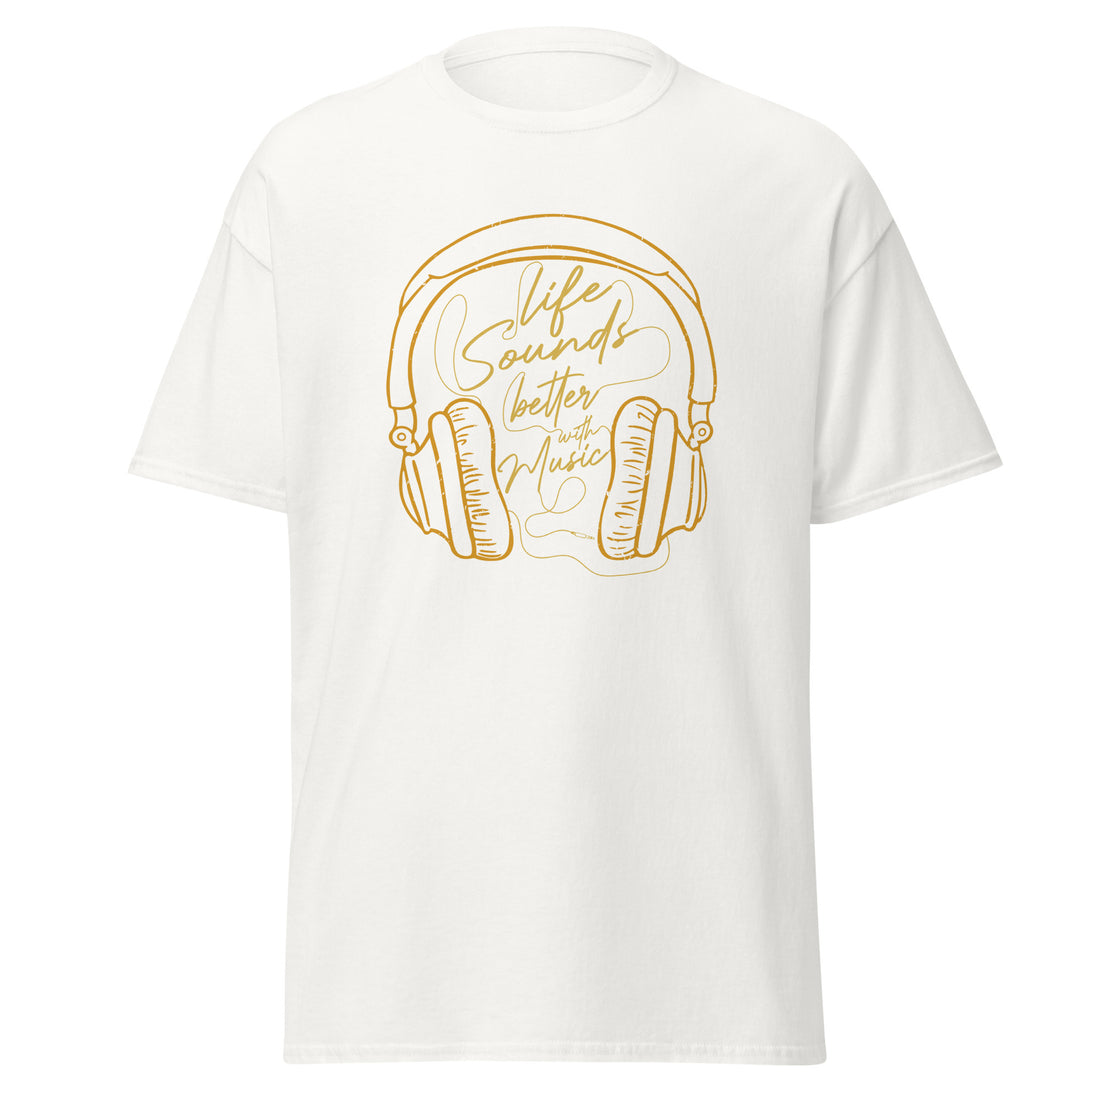 T-Shirt - Life Sounds better with Music